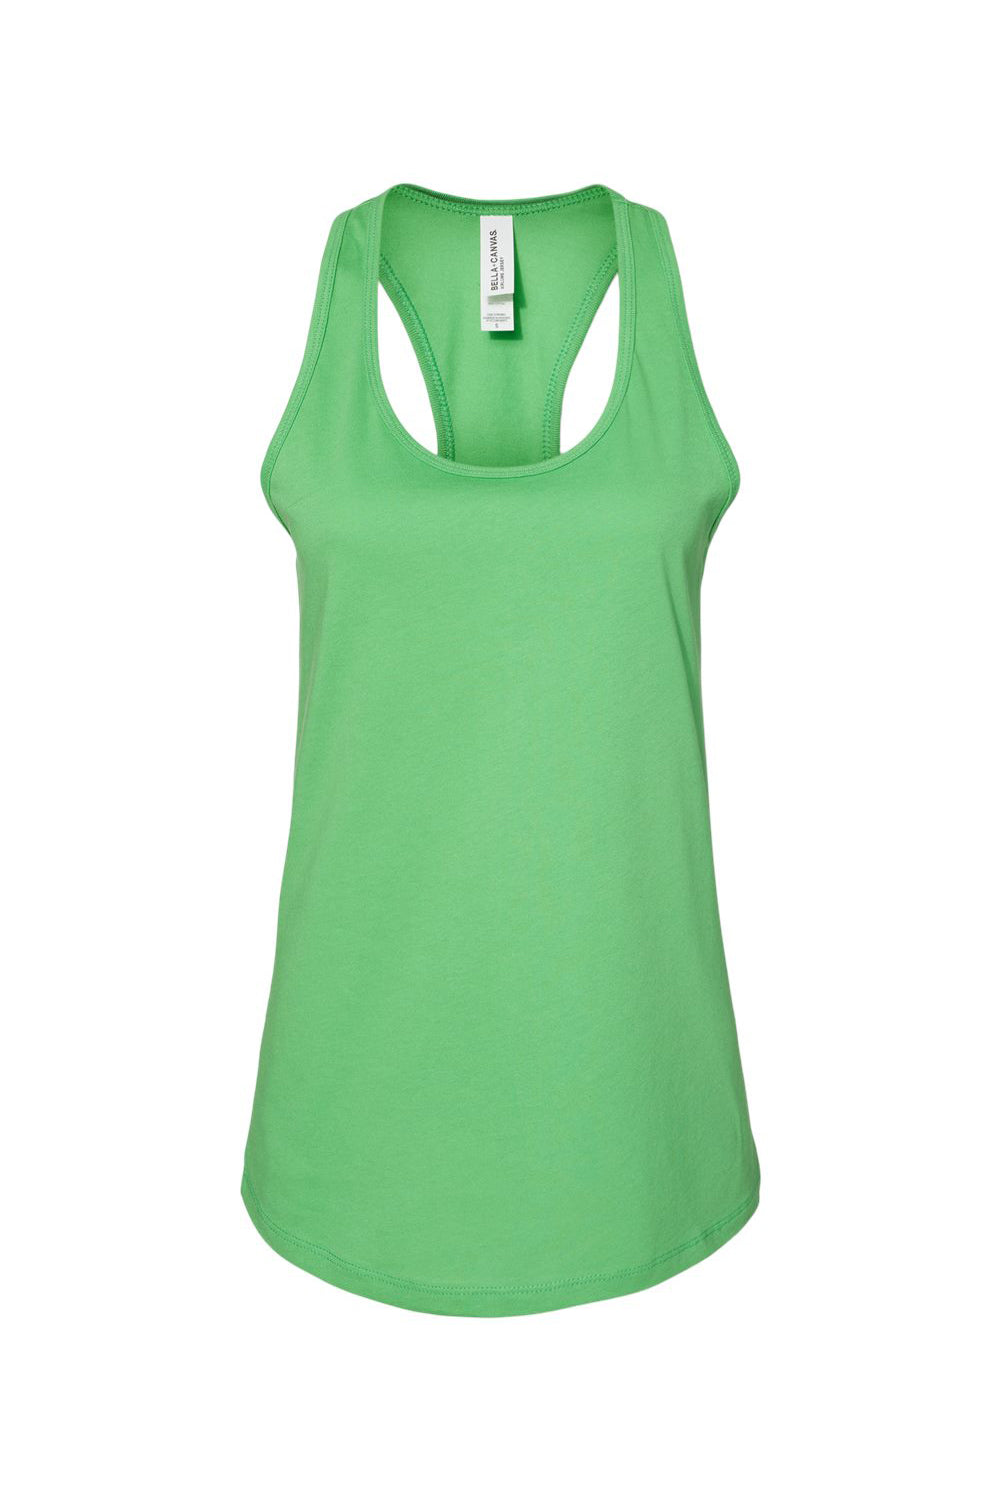 Bella + Canvas BC6008/B6008/6008 Womens Jersey Tank Top Synthetic Green Flat Front